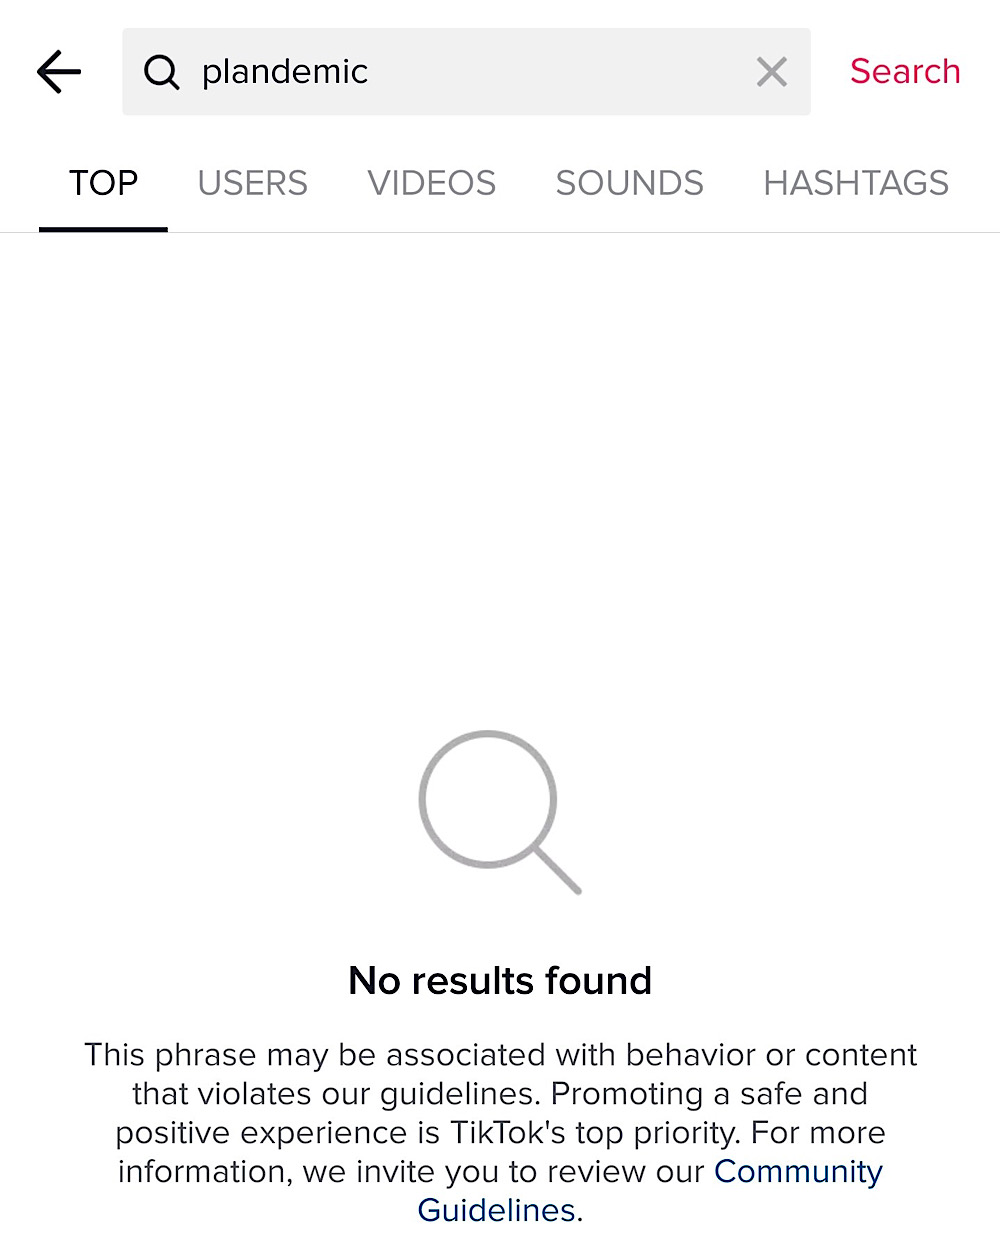 TikTok search results for "plandemic" have been replaced with a message saying the phrase may be associated with behavior or content that violates its guidelines